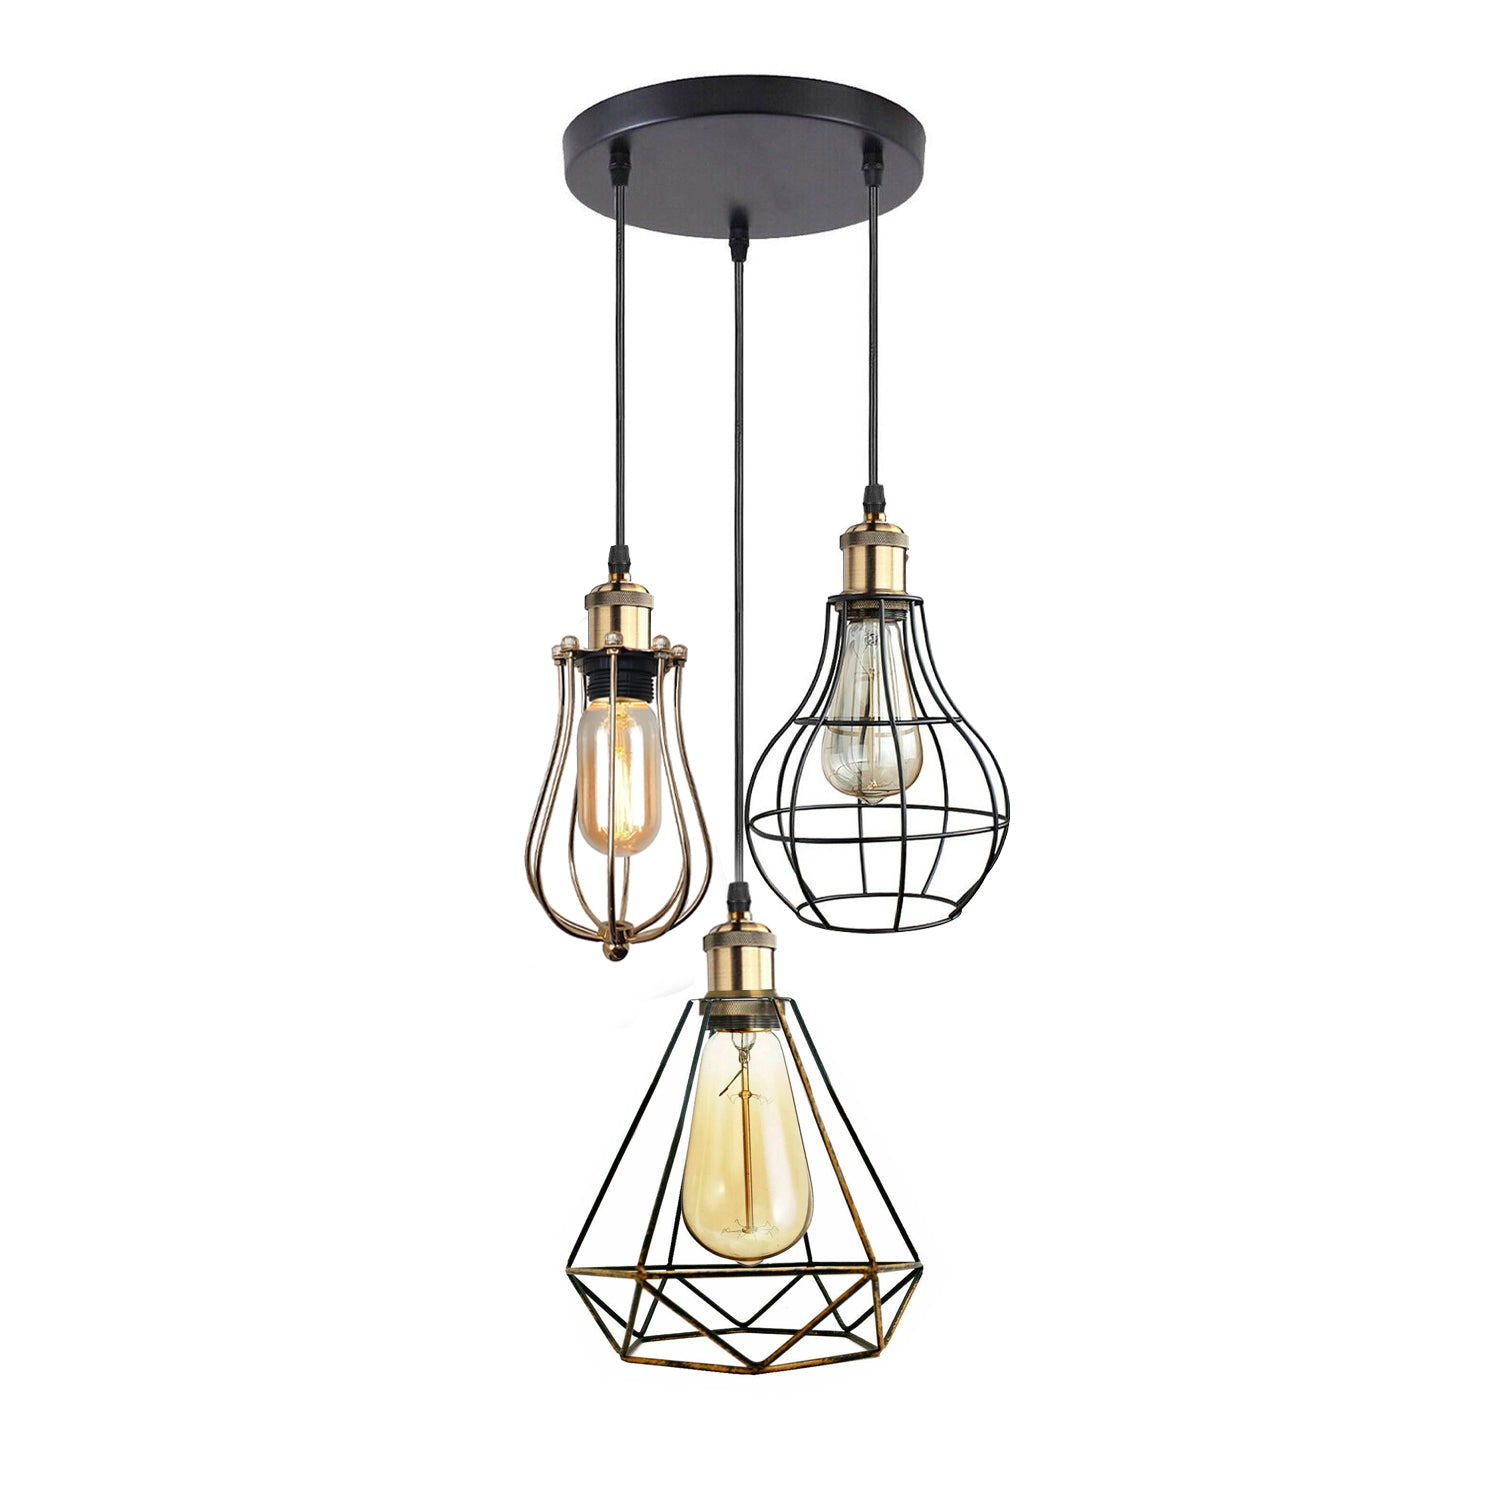 Light Cage Ceiling Hanging Pendant Lamp